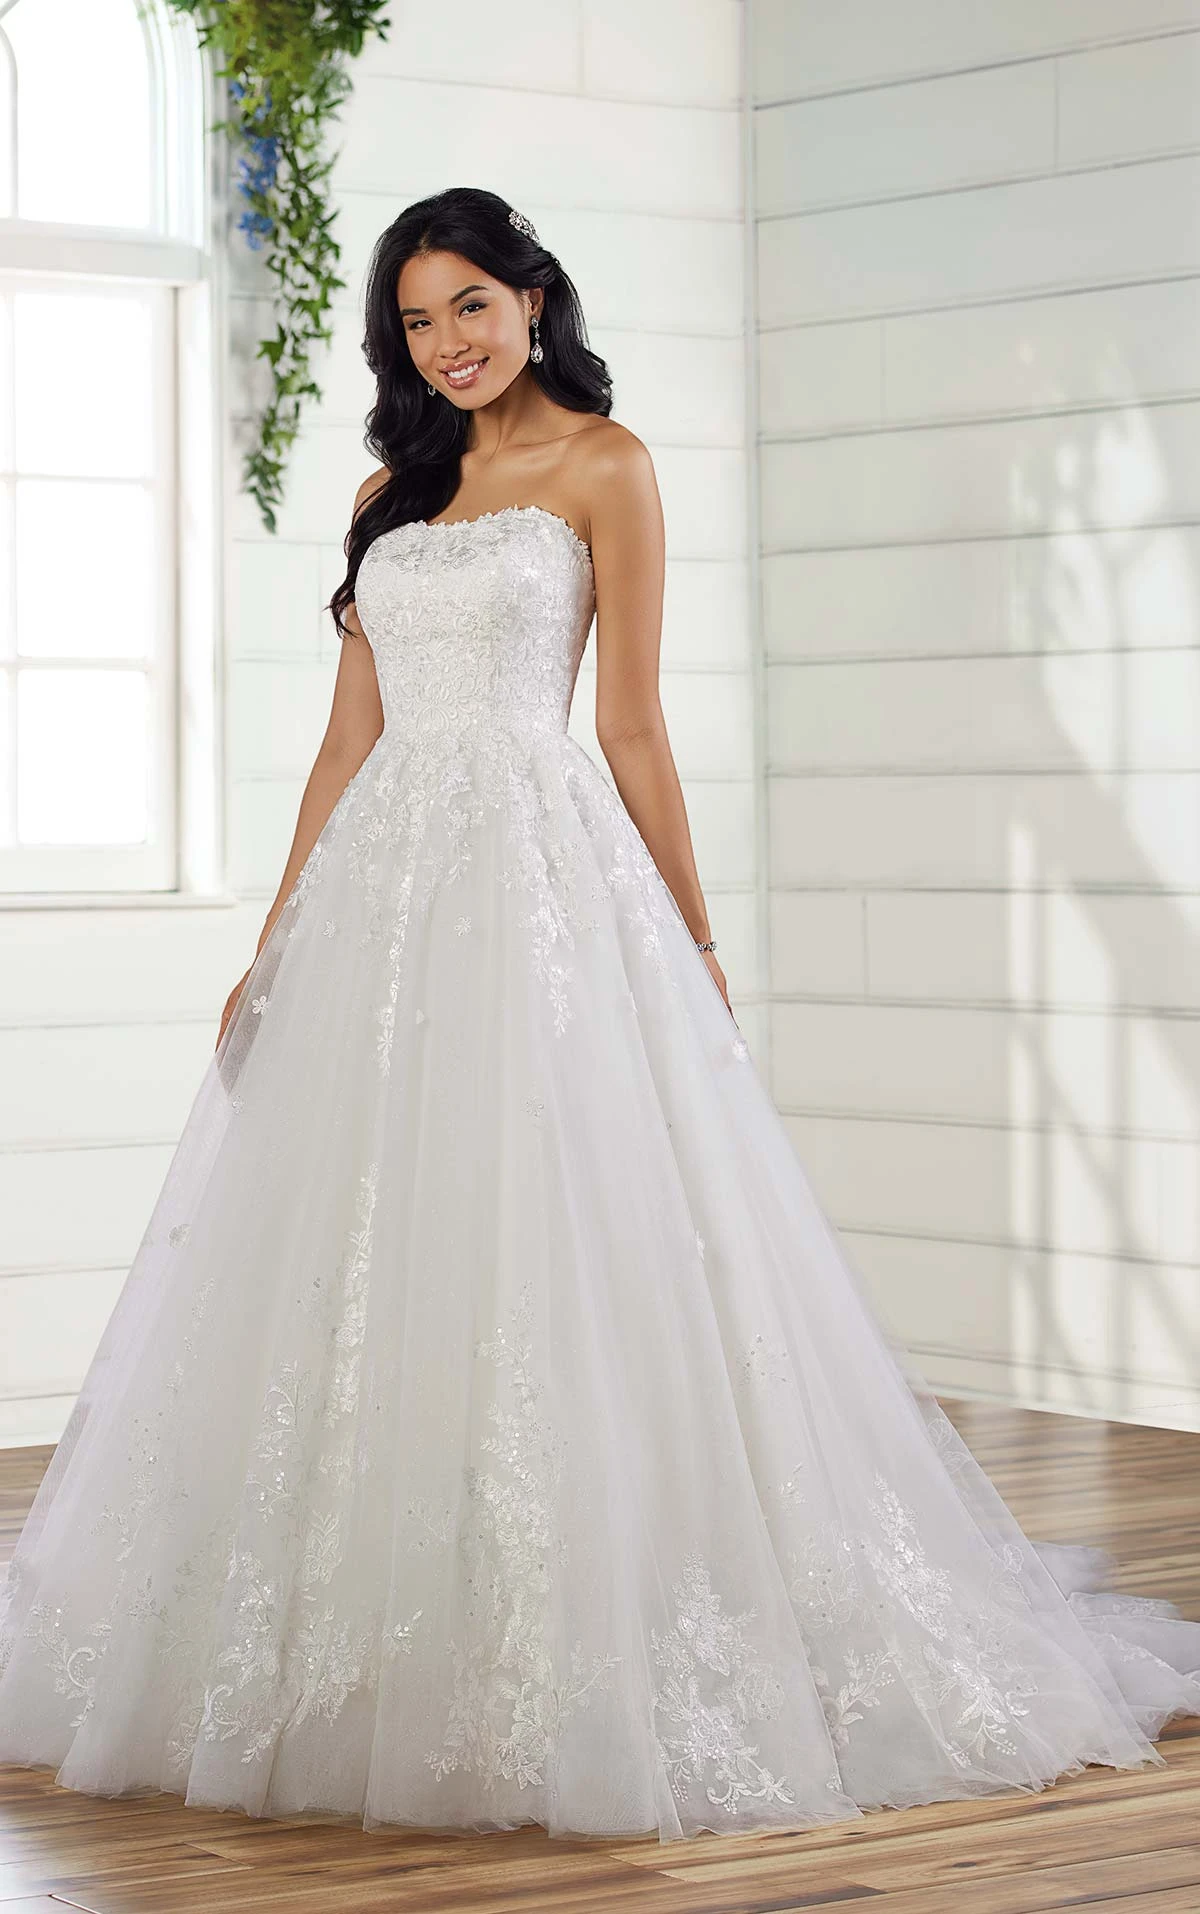 Classic Strapless Ballgown with Glitter Tulle Essense of